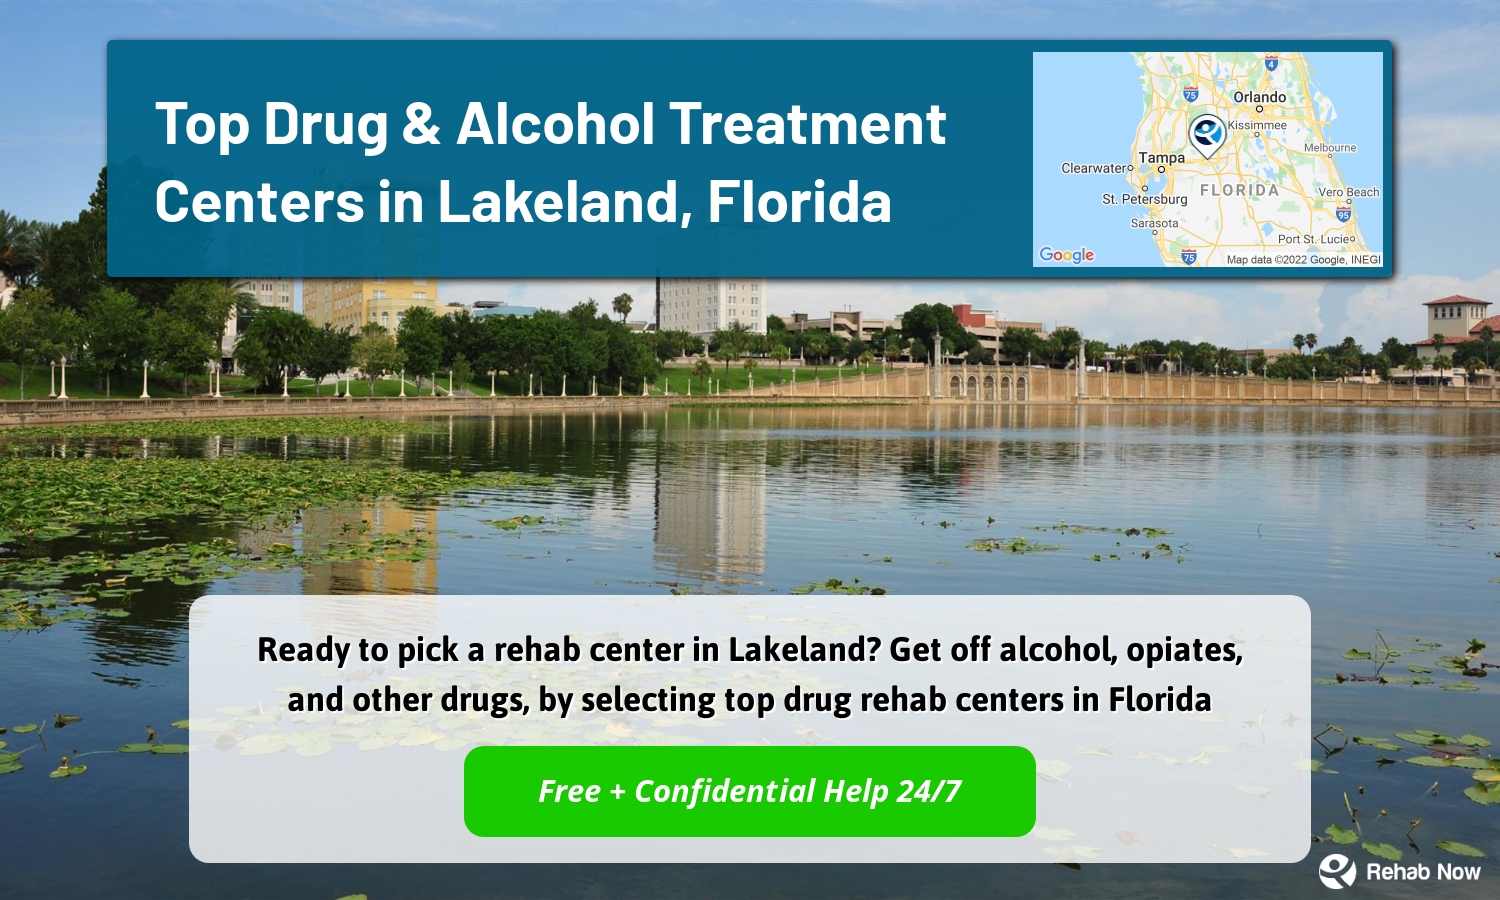 Ready to pick a rehab center in Lakeland? Get off alcohol, opiates, and other drugs, by selecting top drug rehab centers in Florida